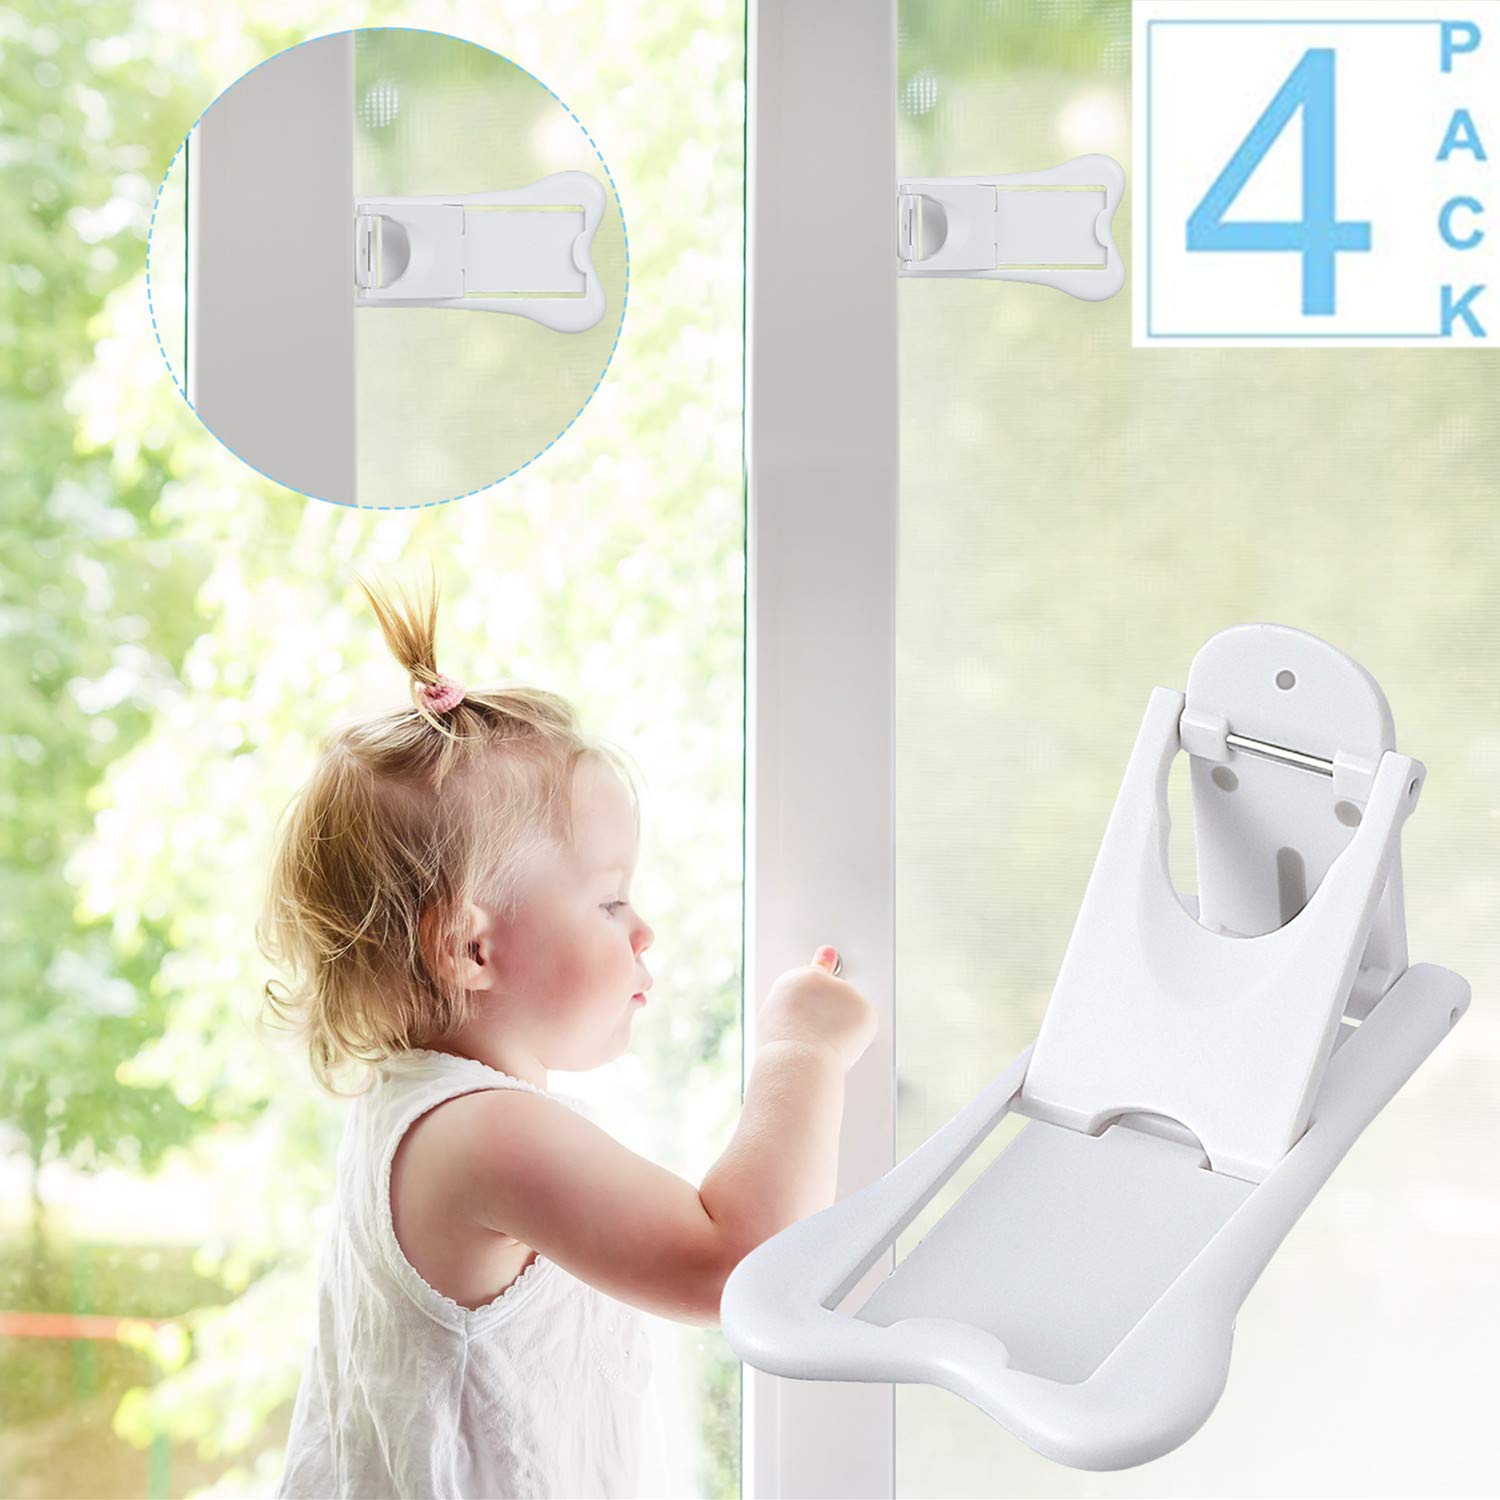 Sliding Door Lock for Baby Safety, Proof Child Pet Doors/Closets/Windows Lock, Childproof Your Home with No Screws or Drills